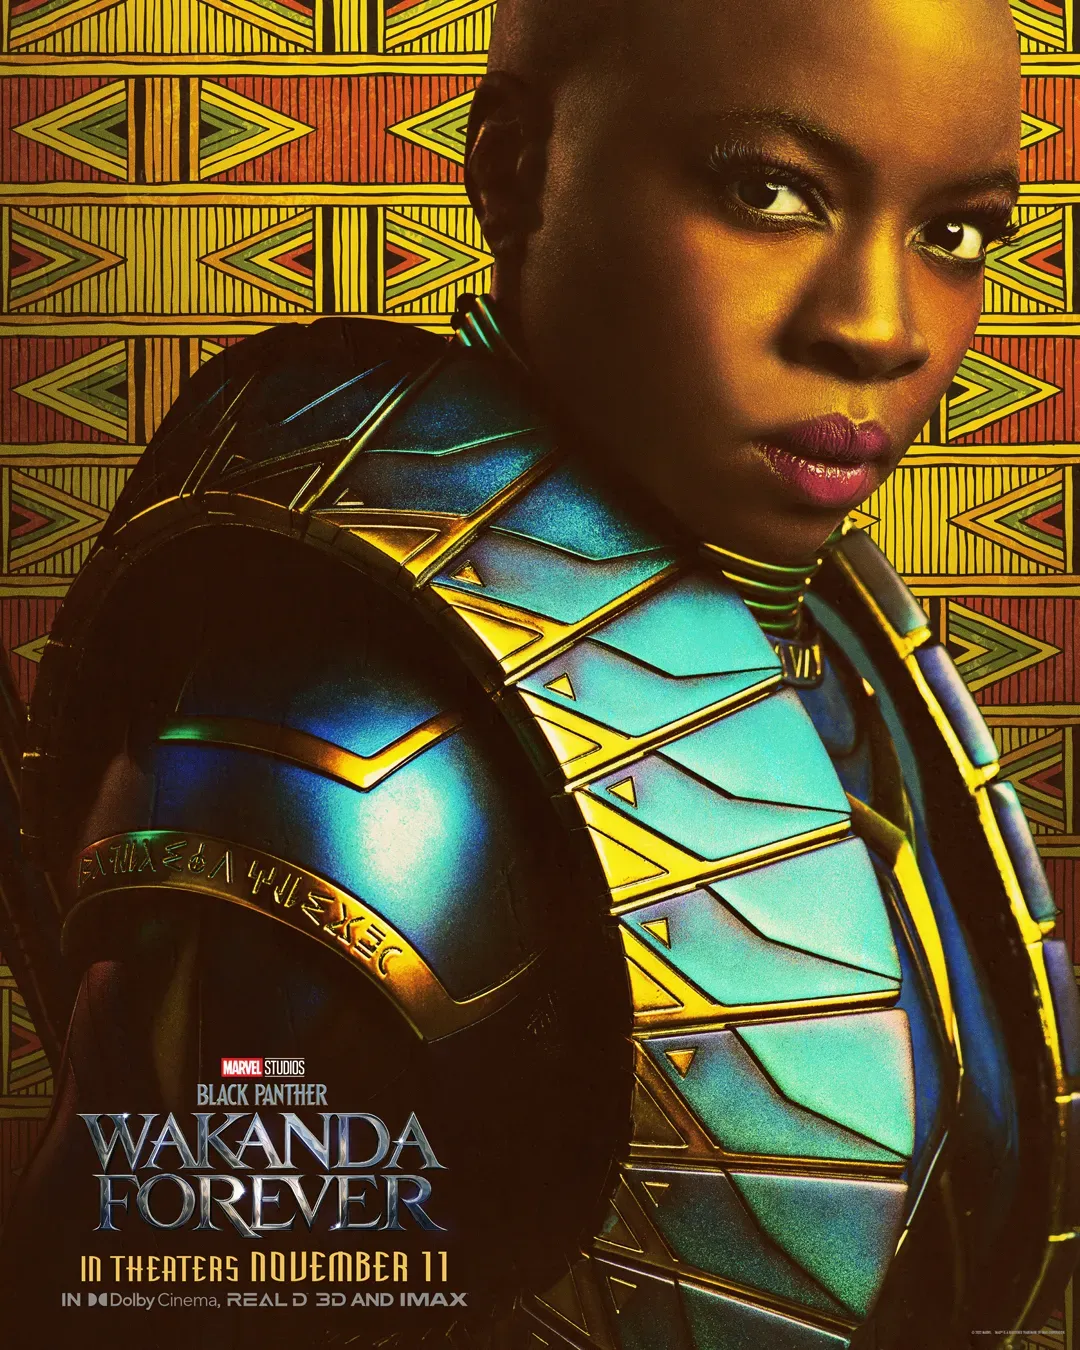 "Black Panther : Wakanda Forever" Releases New Trailer 'Long Live Wakanda' and Character Posters | FMV6